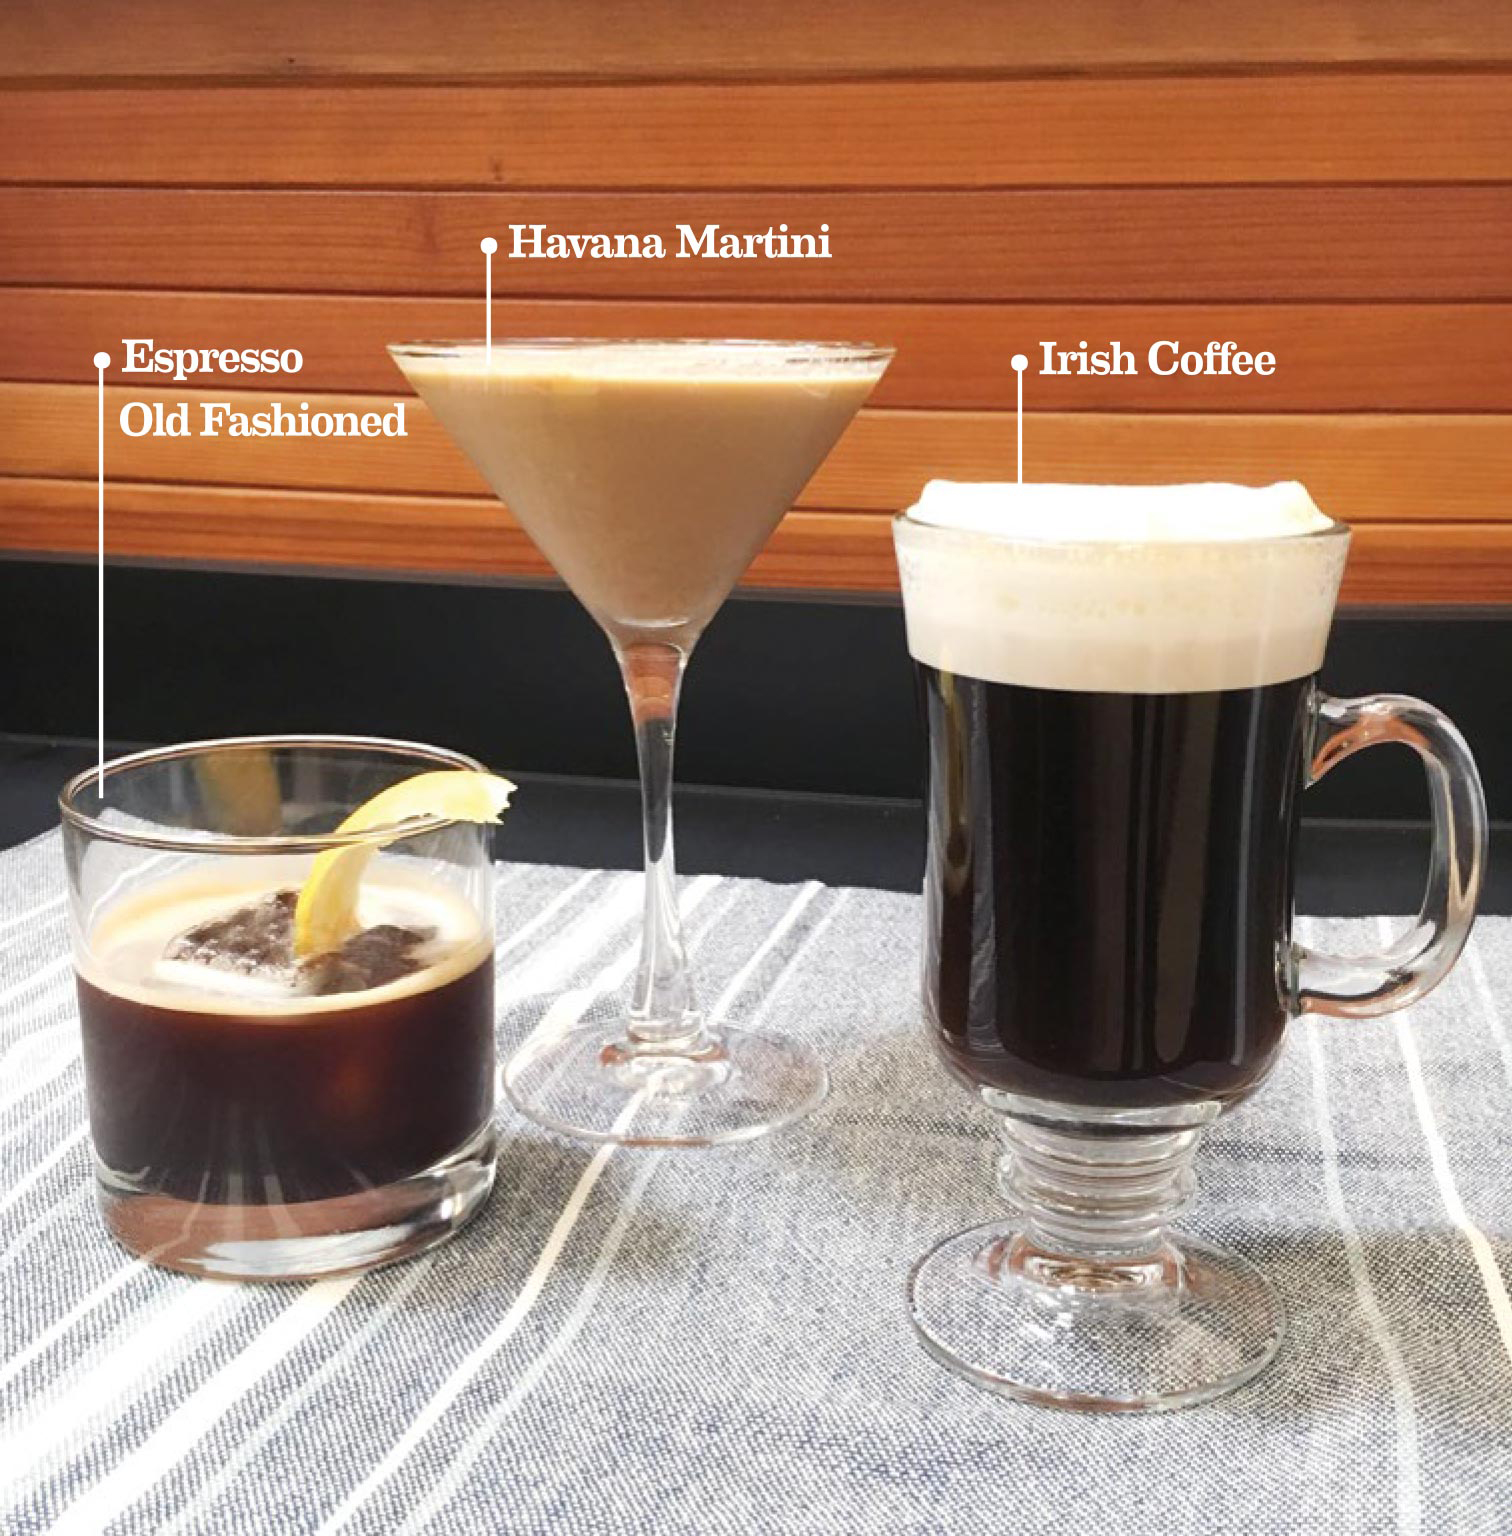 Coffee Cocktails-Time to shake up your menu!